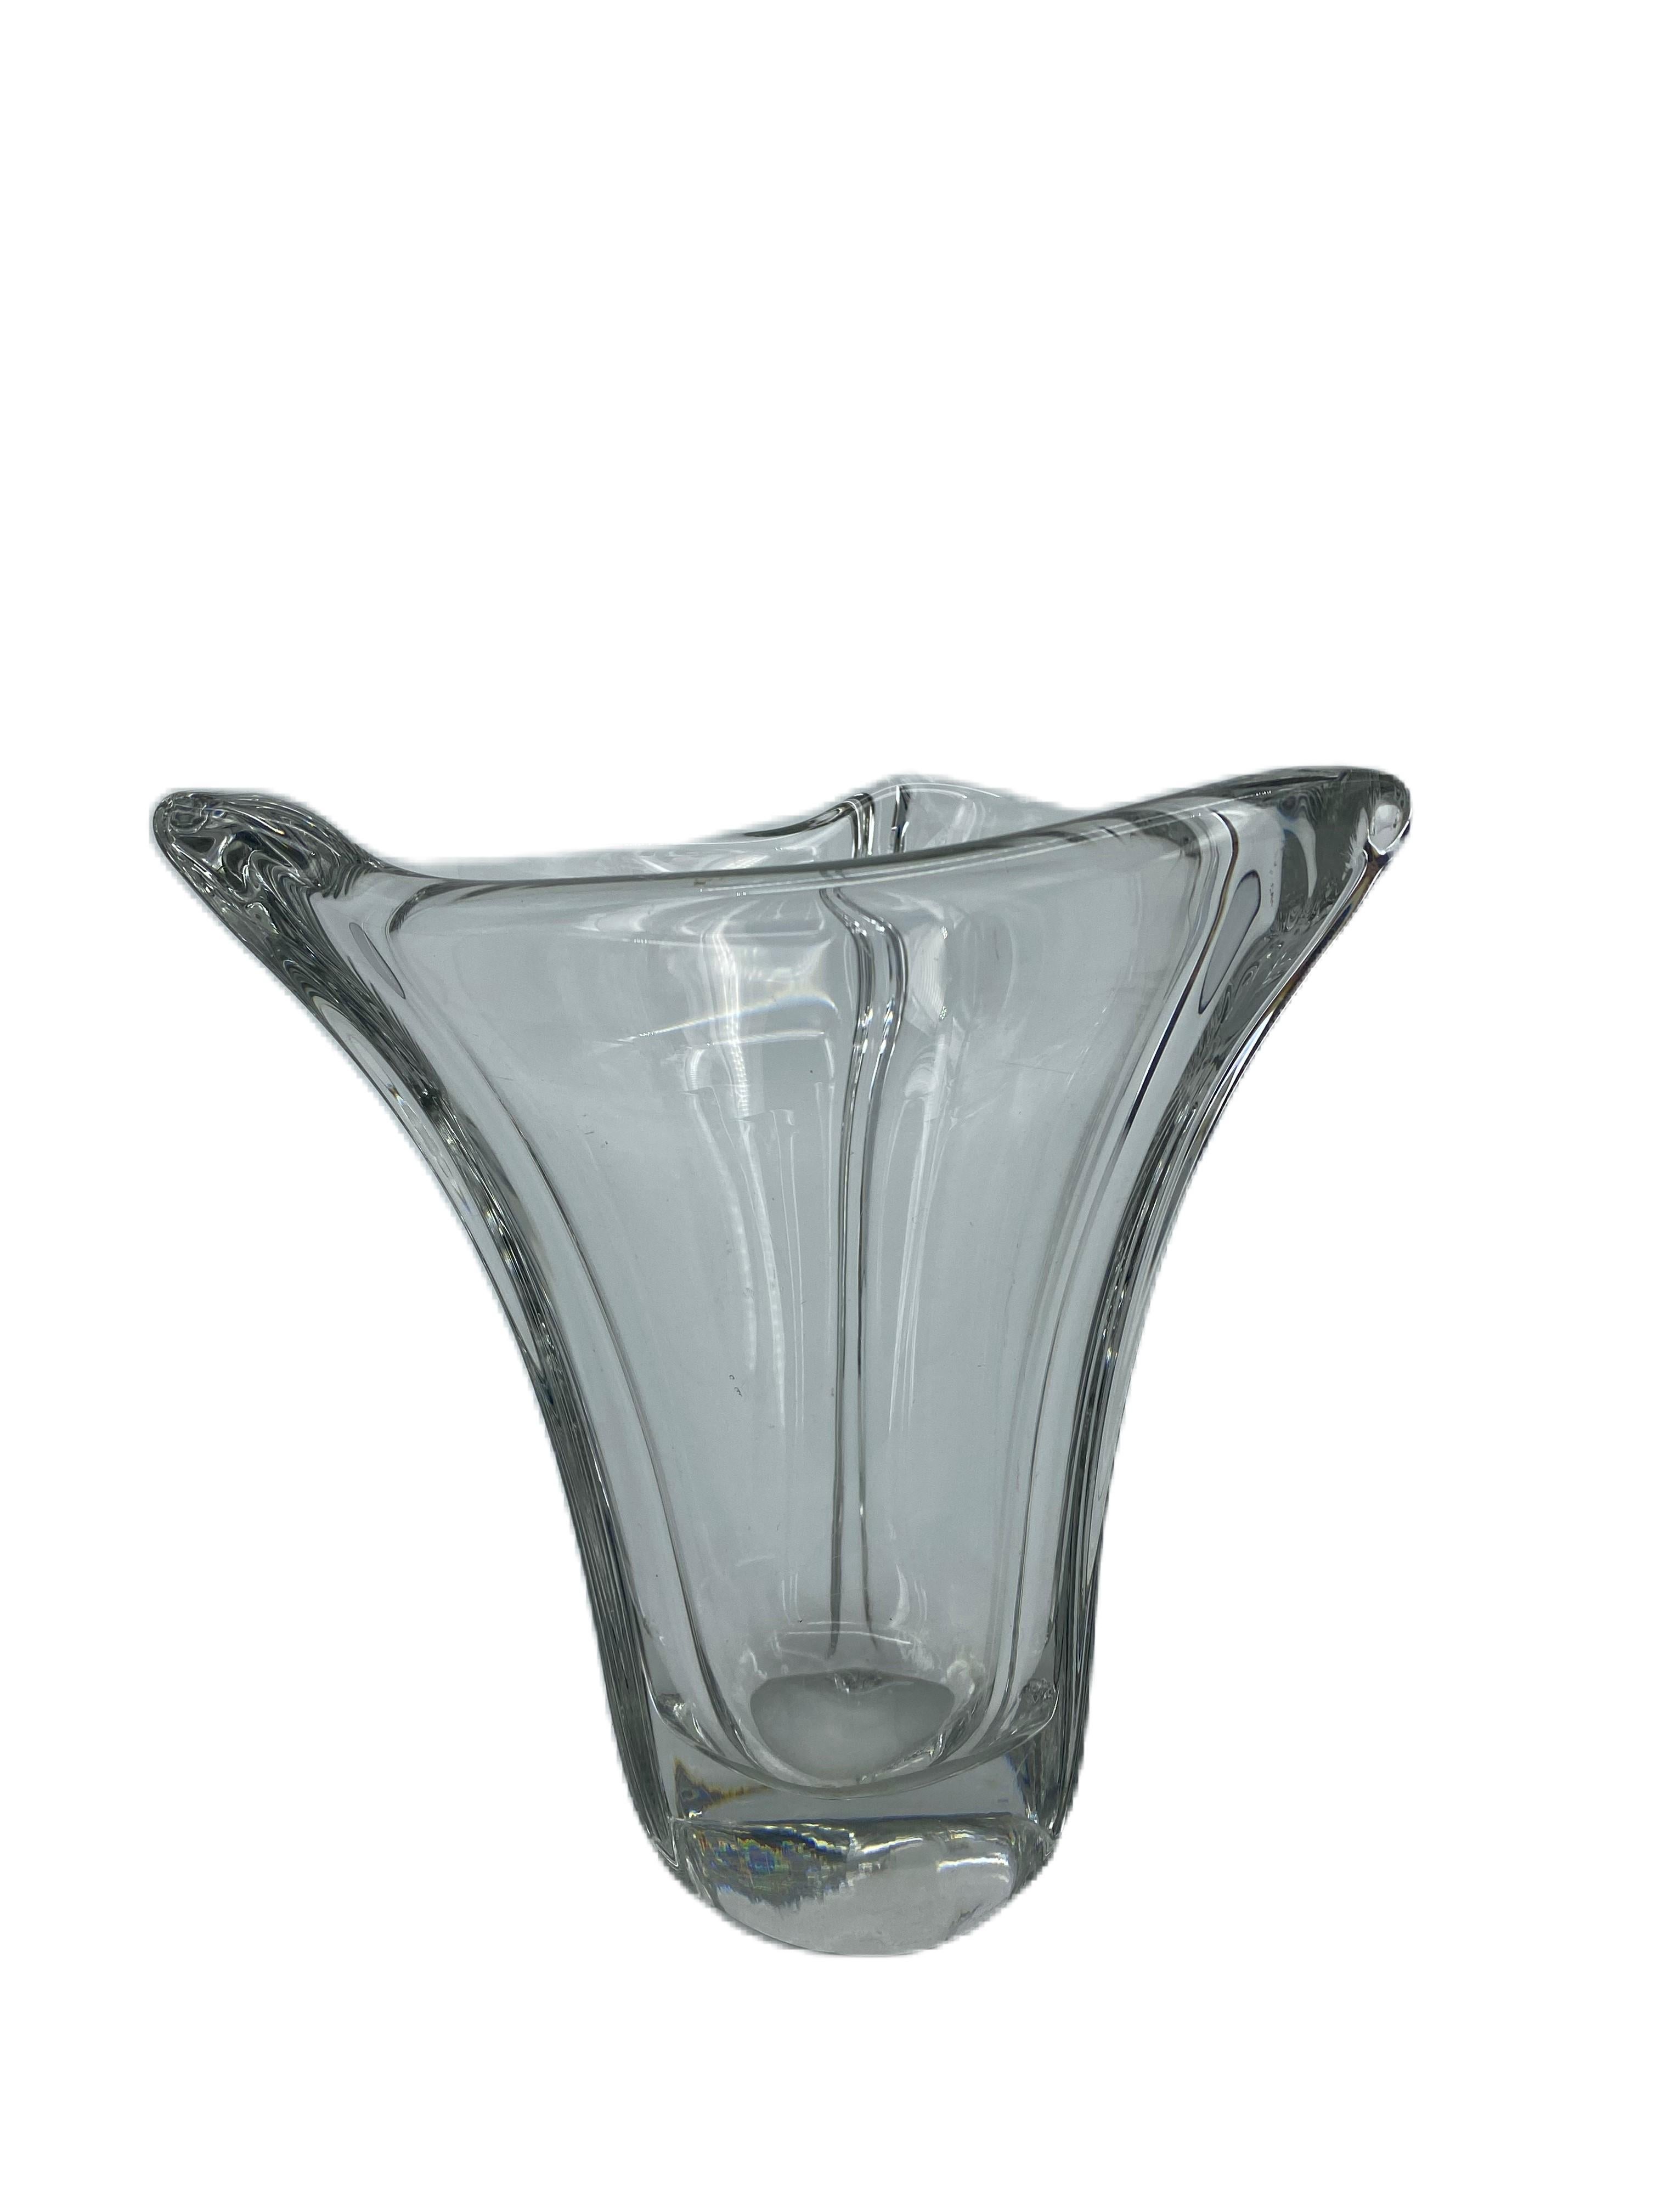 French Clear Crystal Vase Etched Signed Daum Nancy- France 50s

Signed on the base by the prestigious French company Daum. This brand comes from an old factory that Jean Daum (1825 – 1885), an expat from Alsace since 1870, had bought in Nancy in